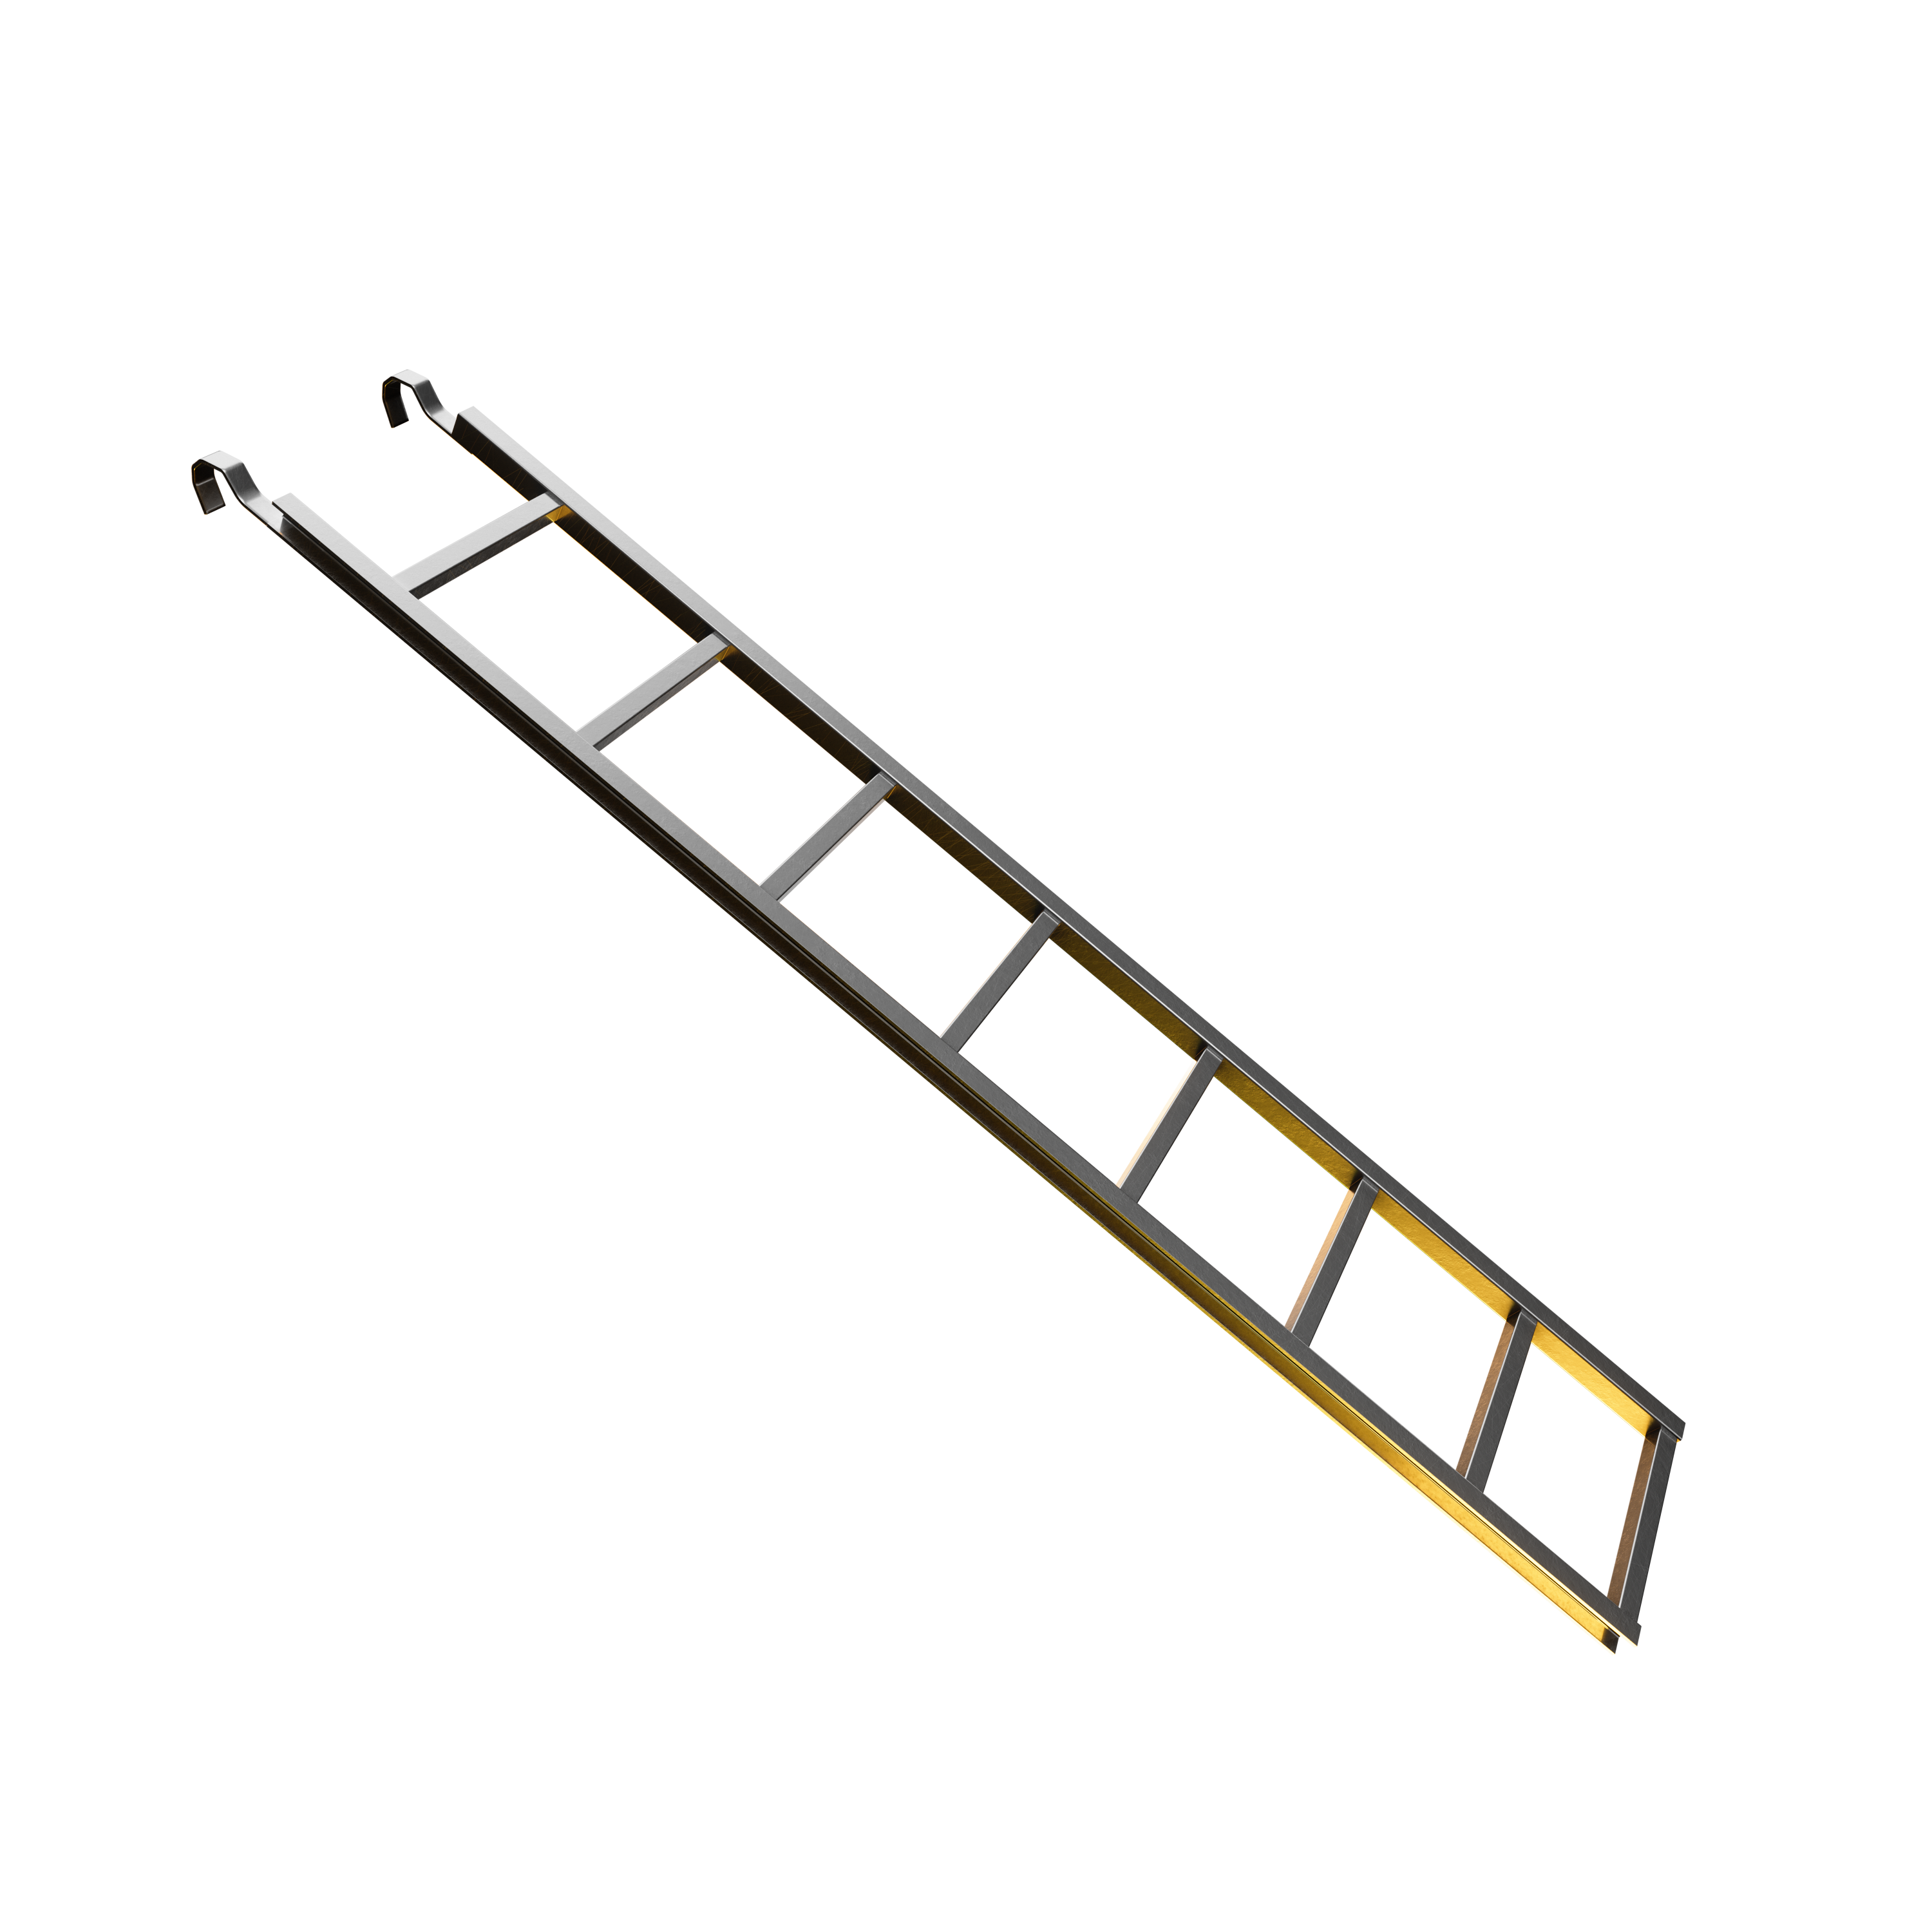 A leaning ladder